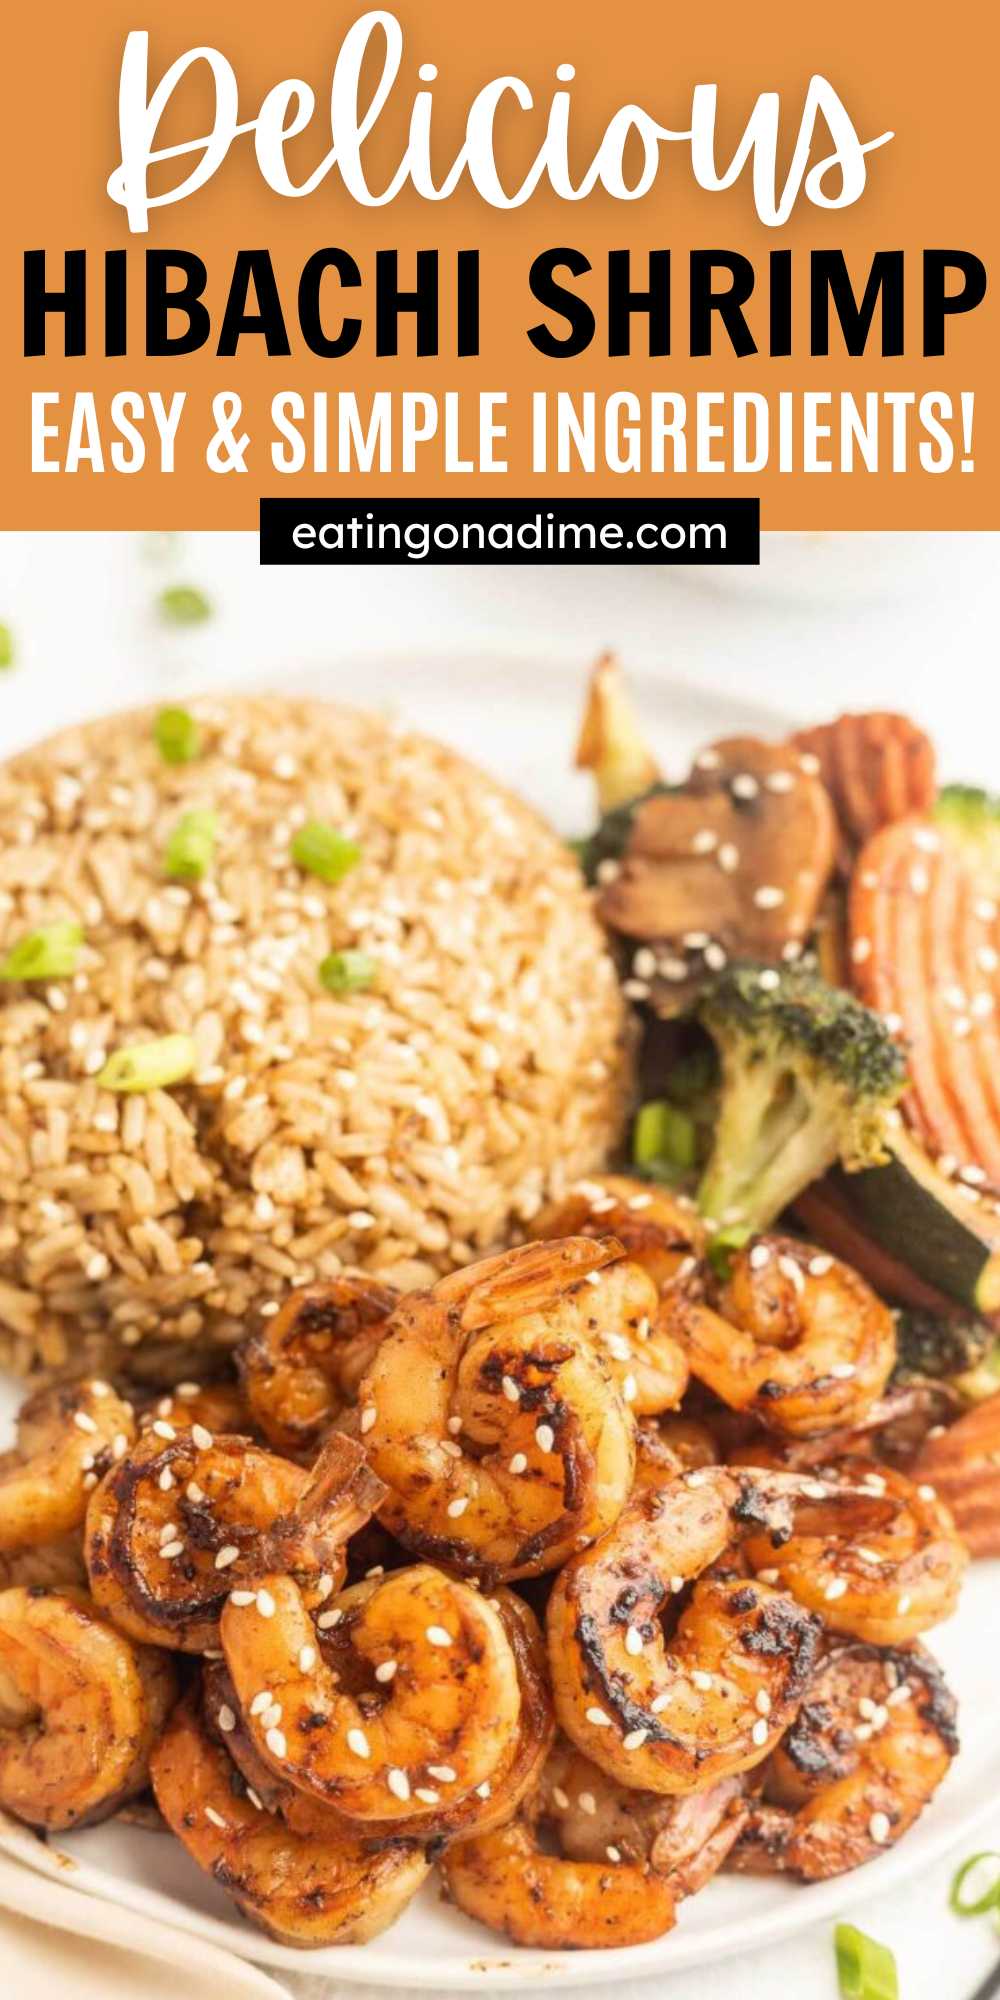 If you love Hibachi Shrimp at the Japanese Steakhouse, enjoy it at home. Pair with fried rice and hibachi vegetables to complete the meal.  Once you see how fast and simple this is, you will love to cook this frequently. #eatingonadime #hibachishrimp #easyhibachishrimp